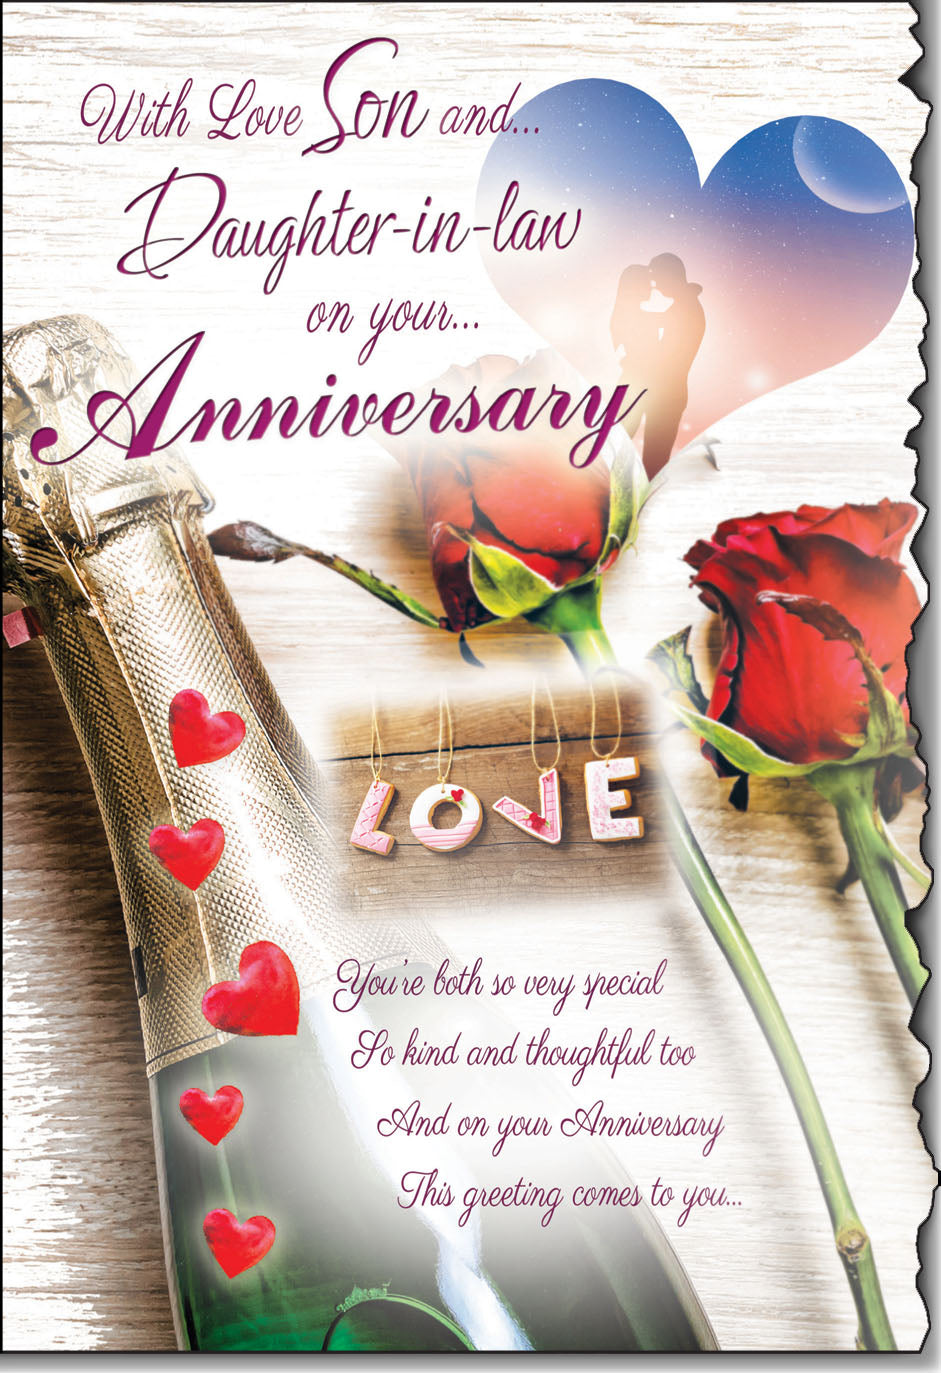 Son and Daughter-in-law anniversary card- loving verse